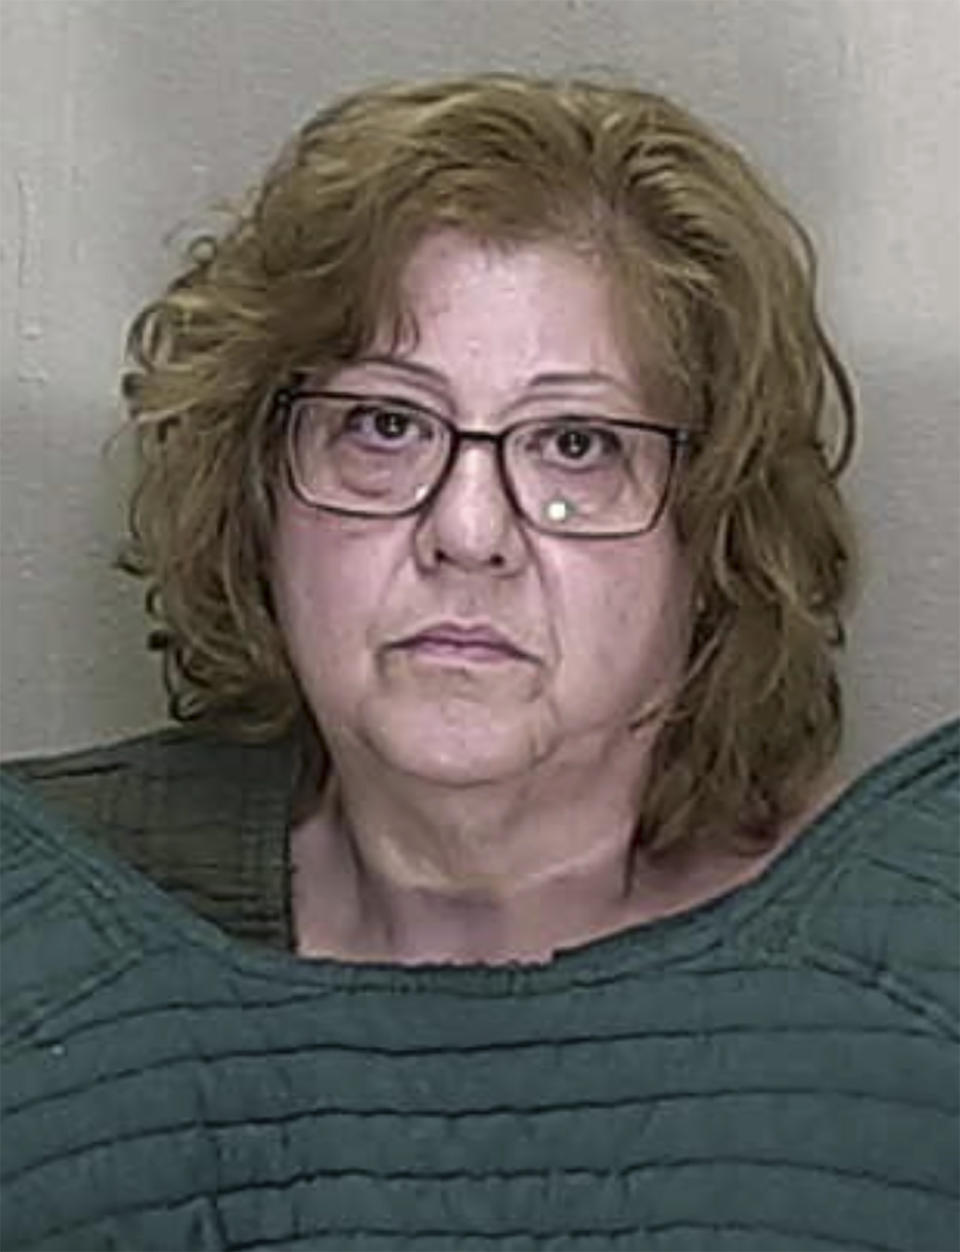 This booking image provided by the Marion County, Fla., Sheriff’s Office shows Susan Louise Lorincz, 58, charged with shooting and killing her Black neighbor. Lorincz, who made her initial appearance in court by video, Thursday, June 8, 2023, has been charged with the first-degree felony of manslaughter with a firearm, as well as culpable negligence, battery and two counts of assault. (Marion County Sheriff’s Office via AP)